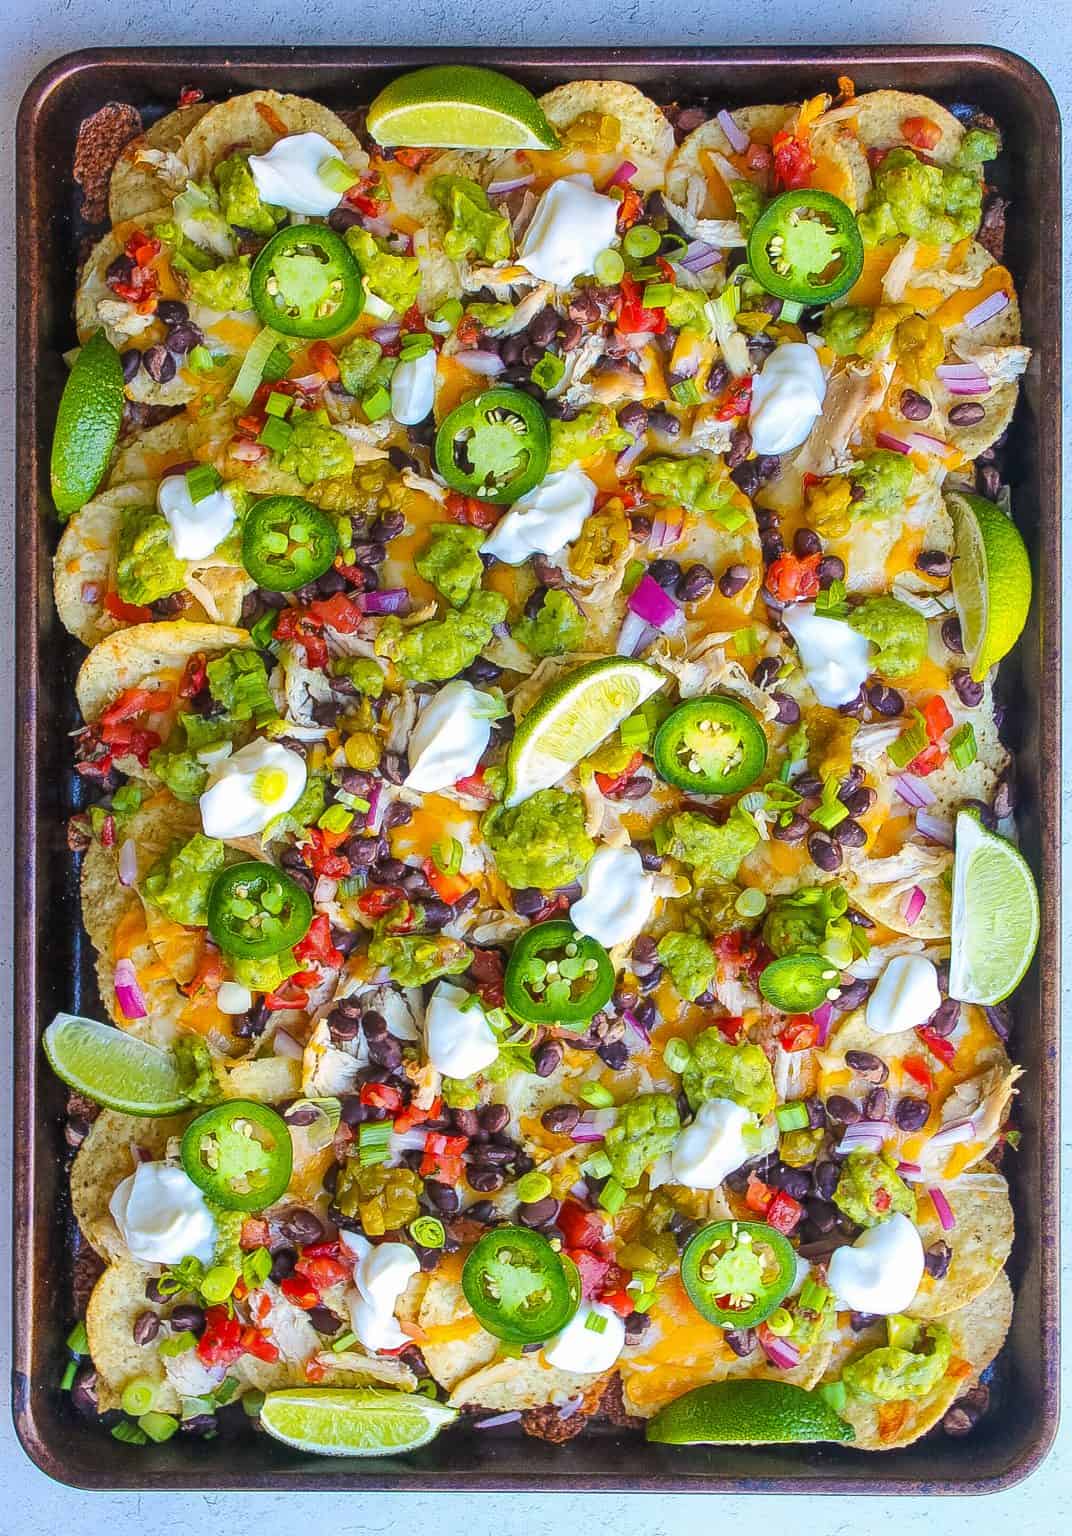 Sheet pan of nachos loaded with shredded chicken, jalapenos, black beans and lime.